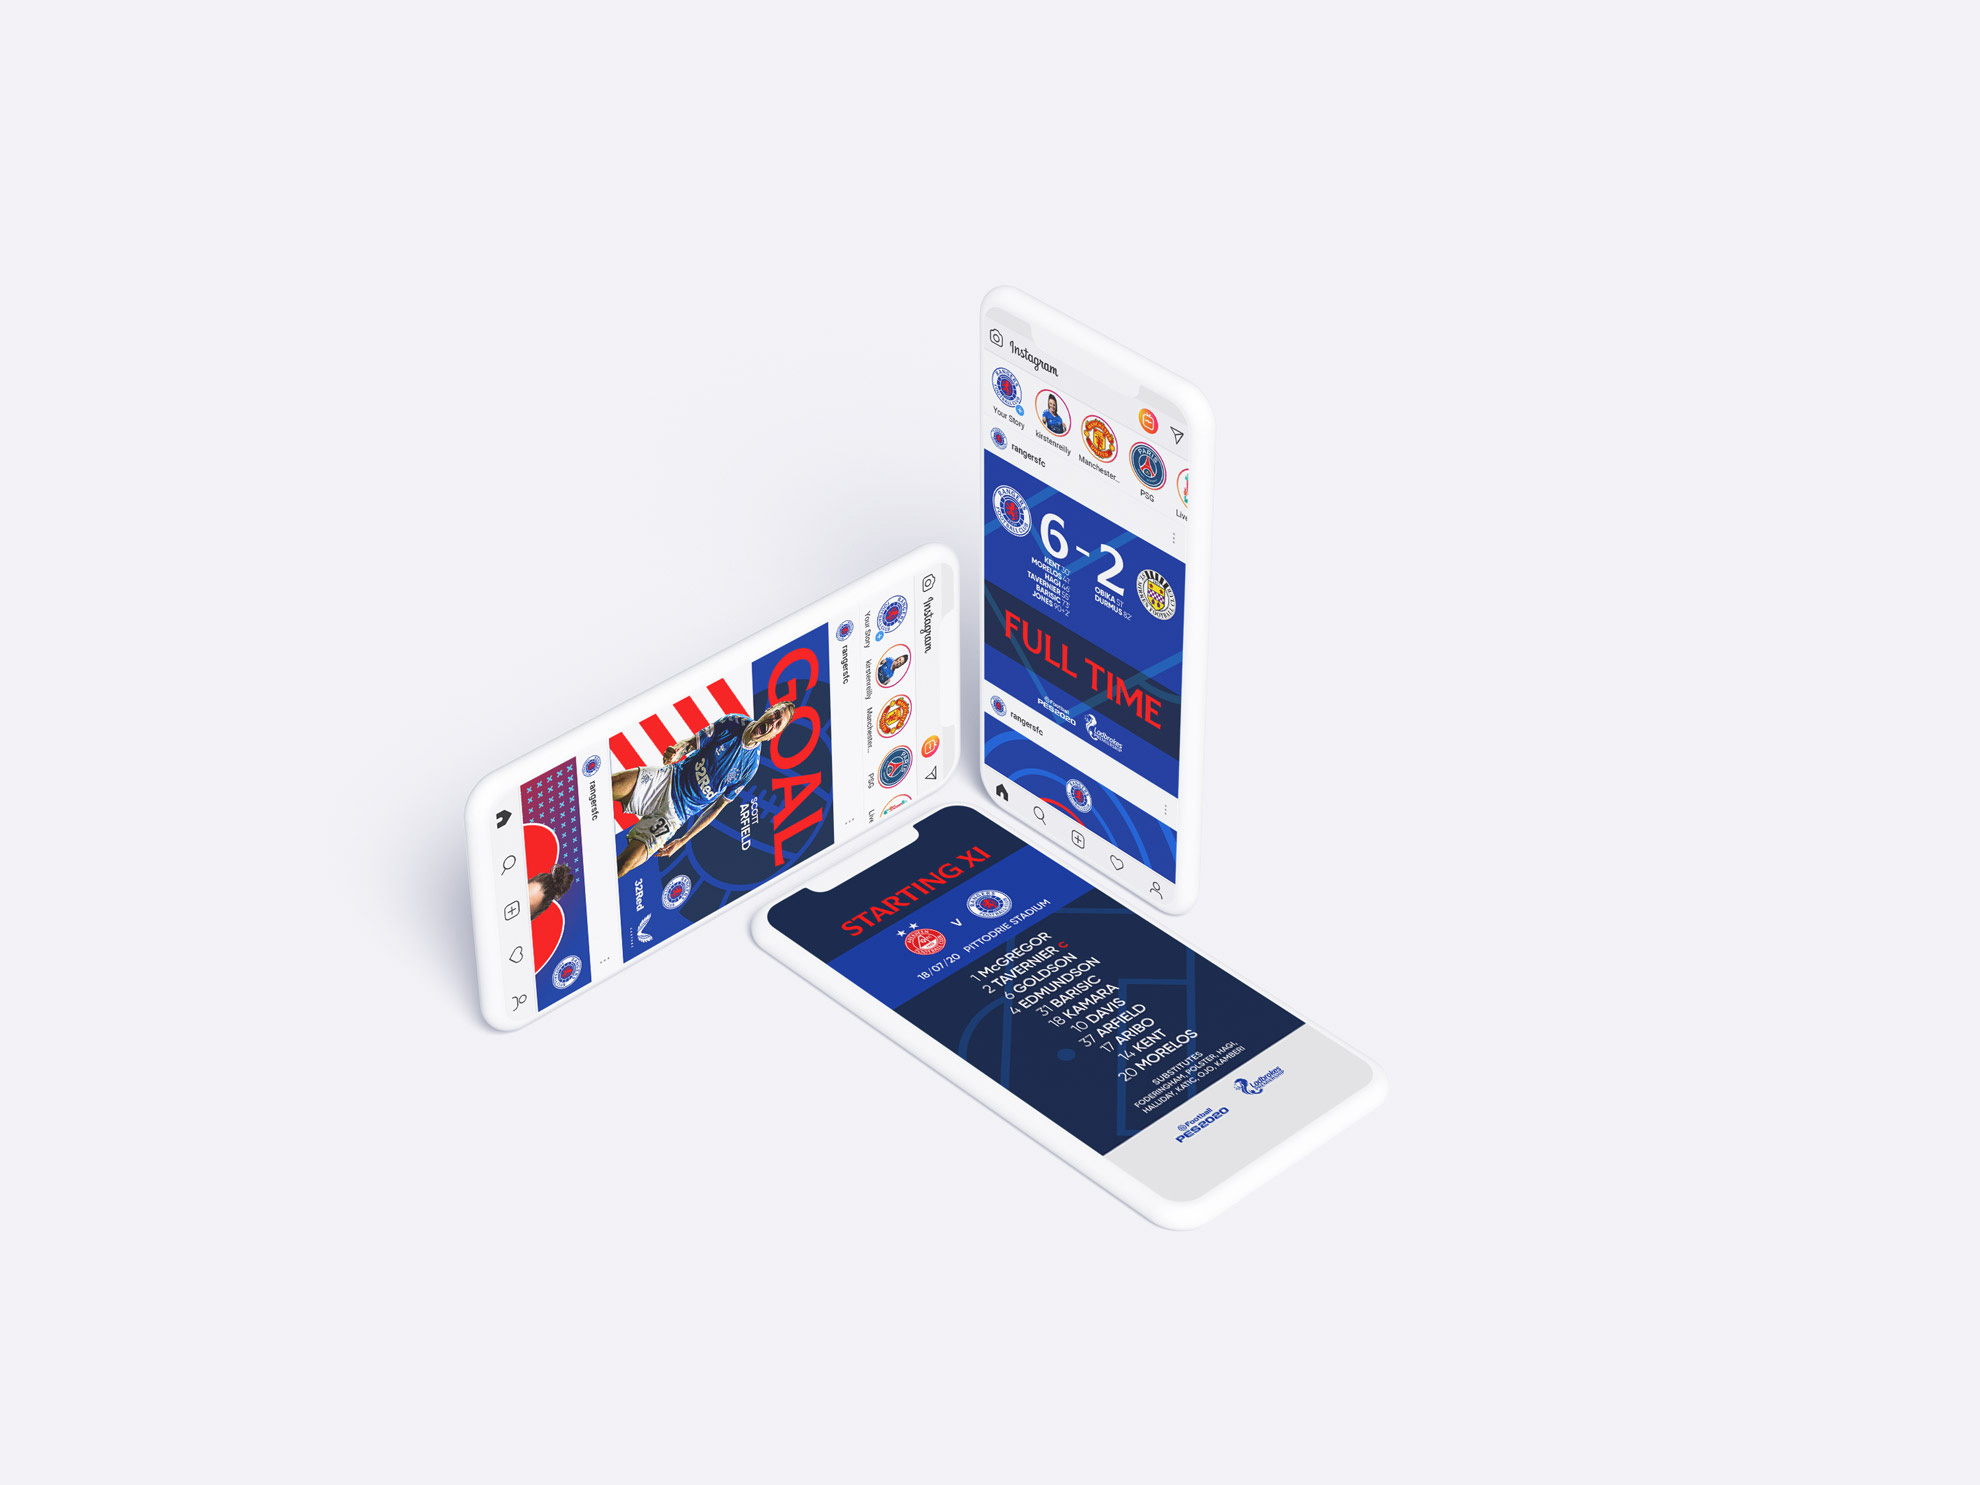 New Logo and Identity for Rangers Football Club by See Saw Creative